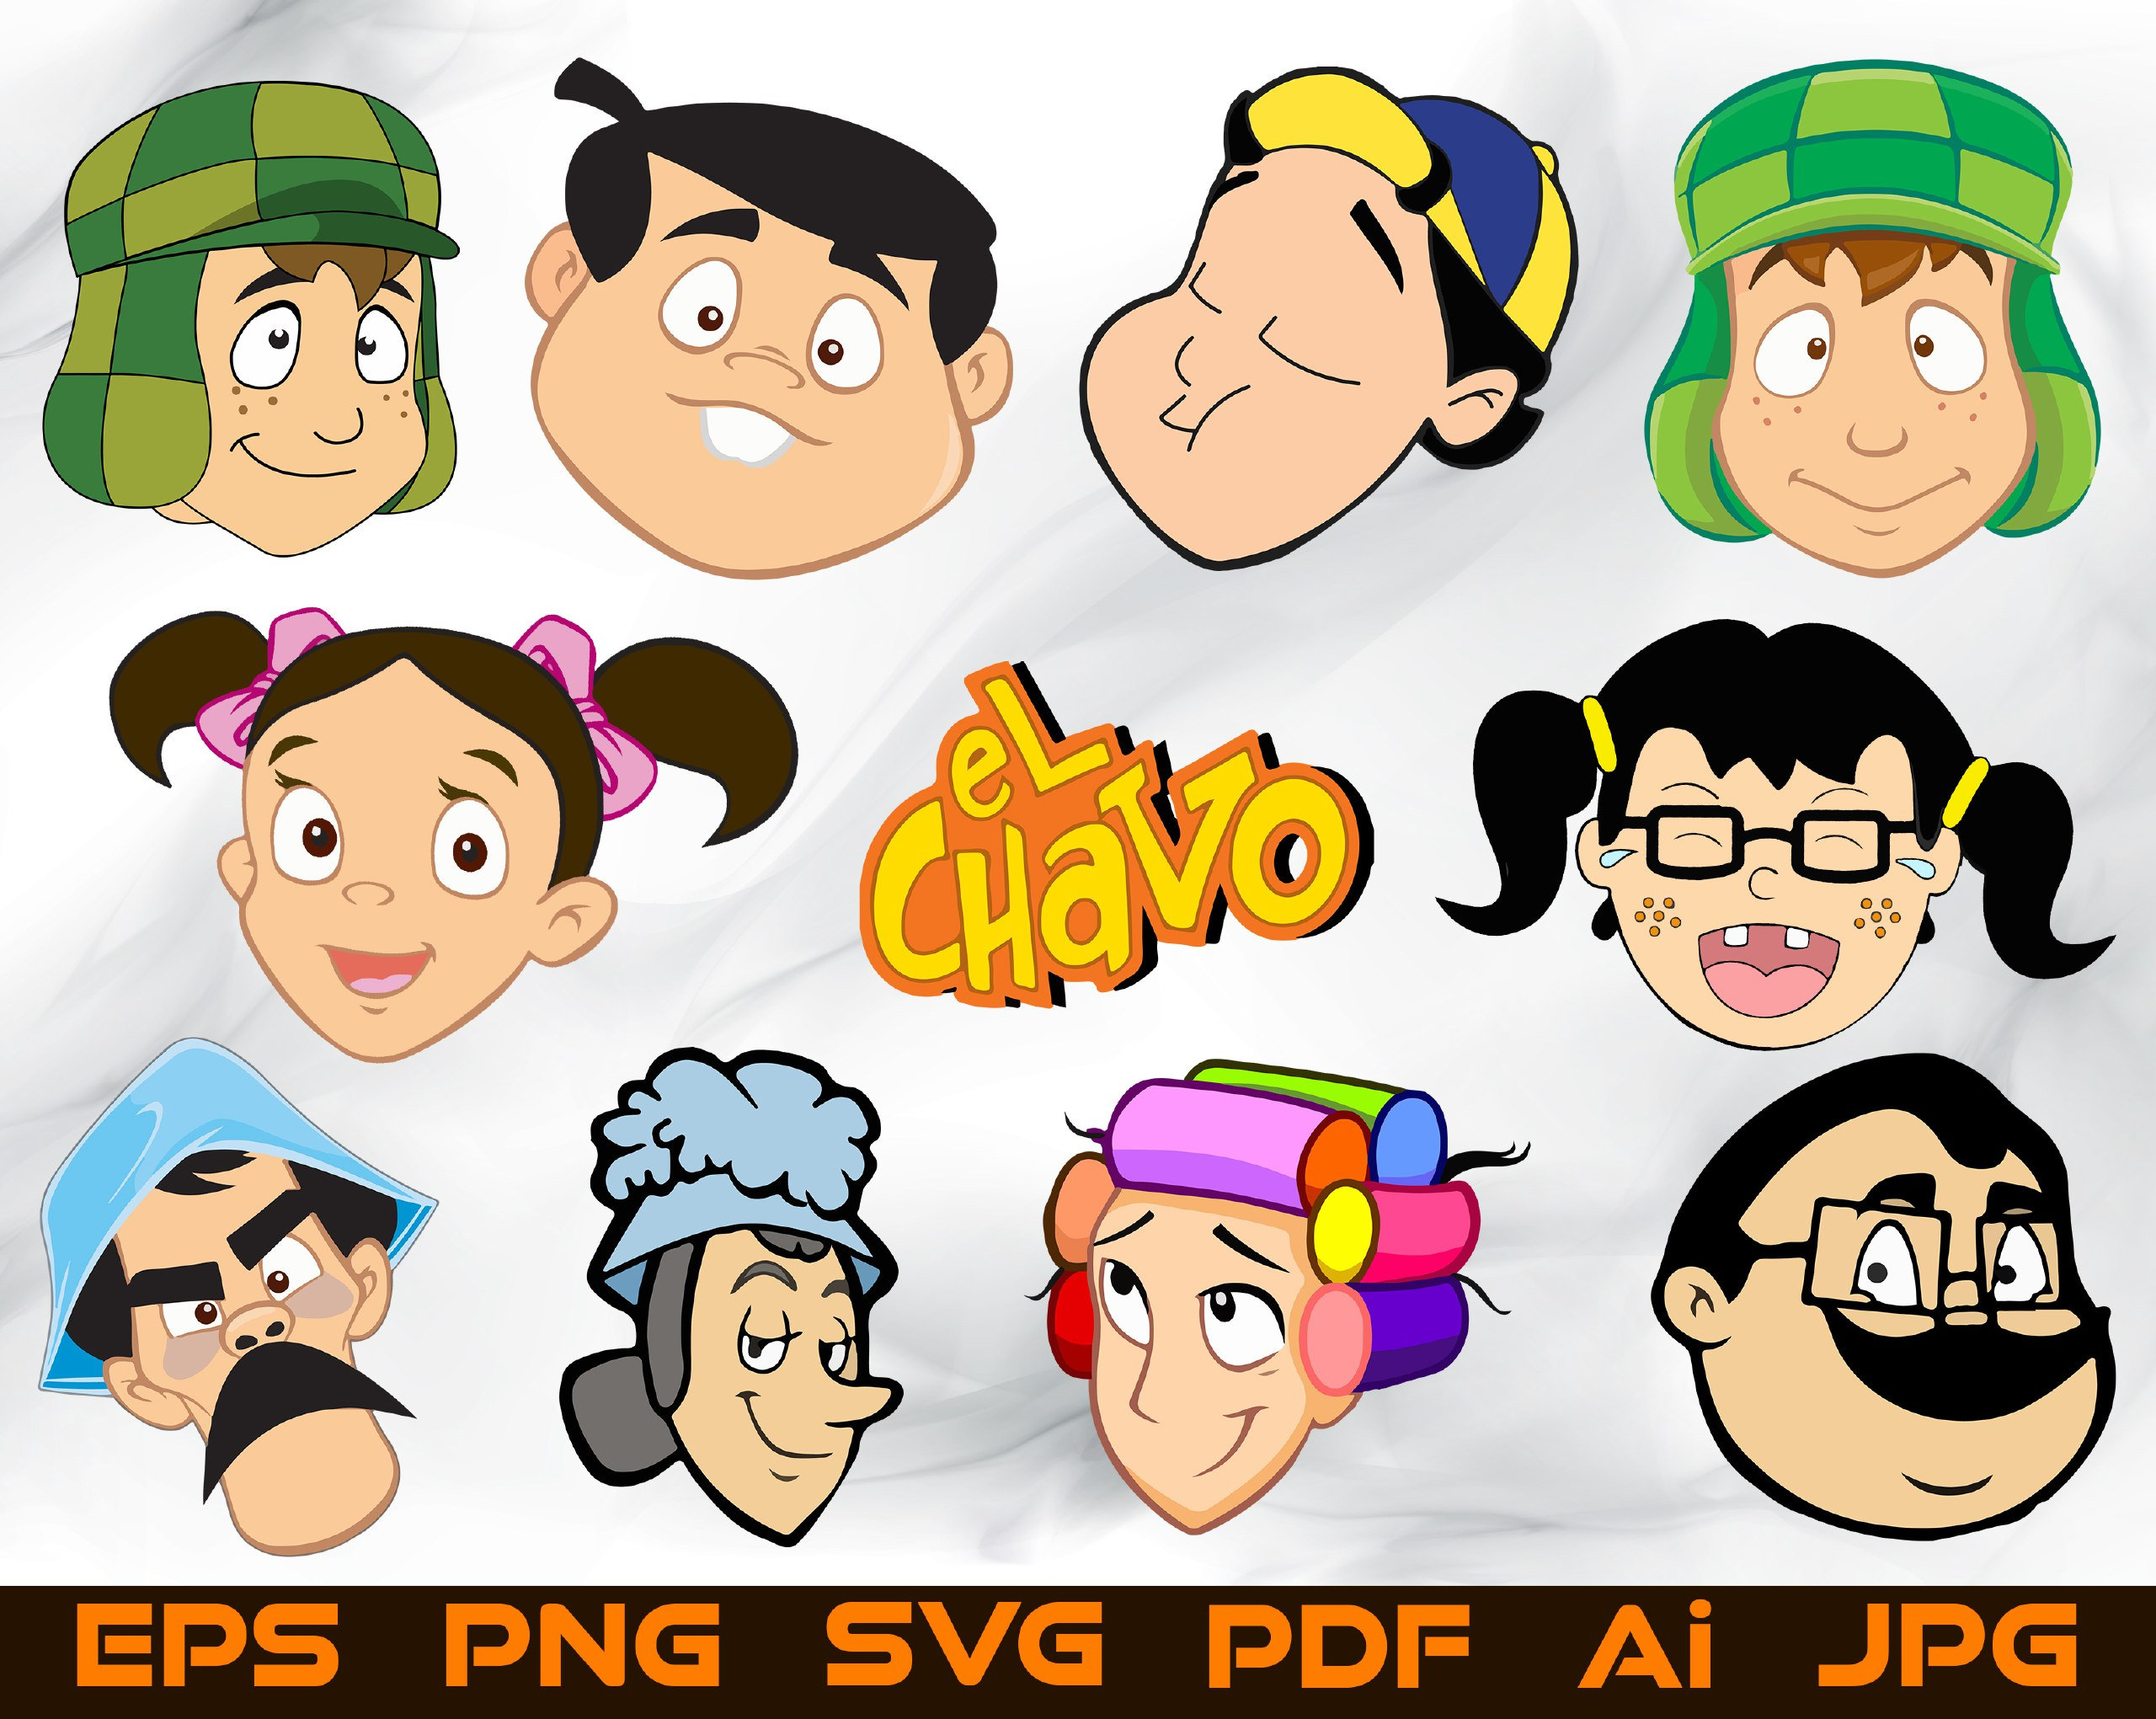 8 clipart png images